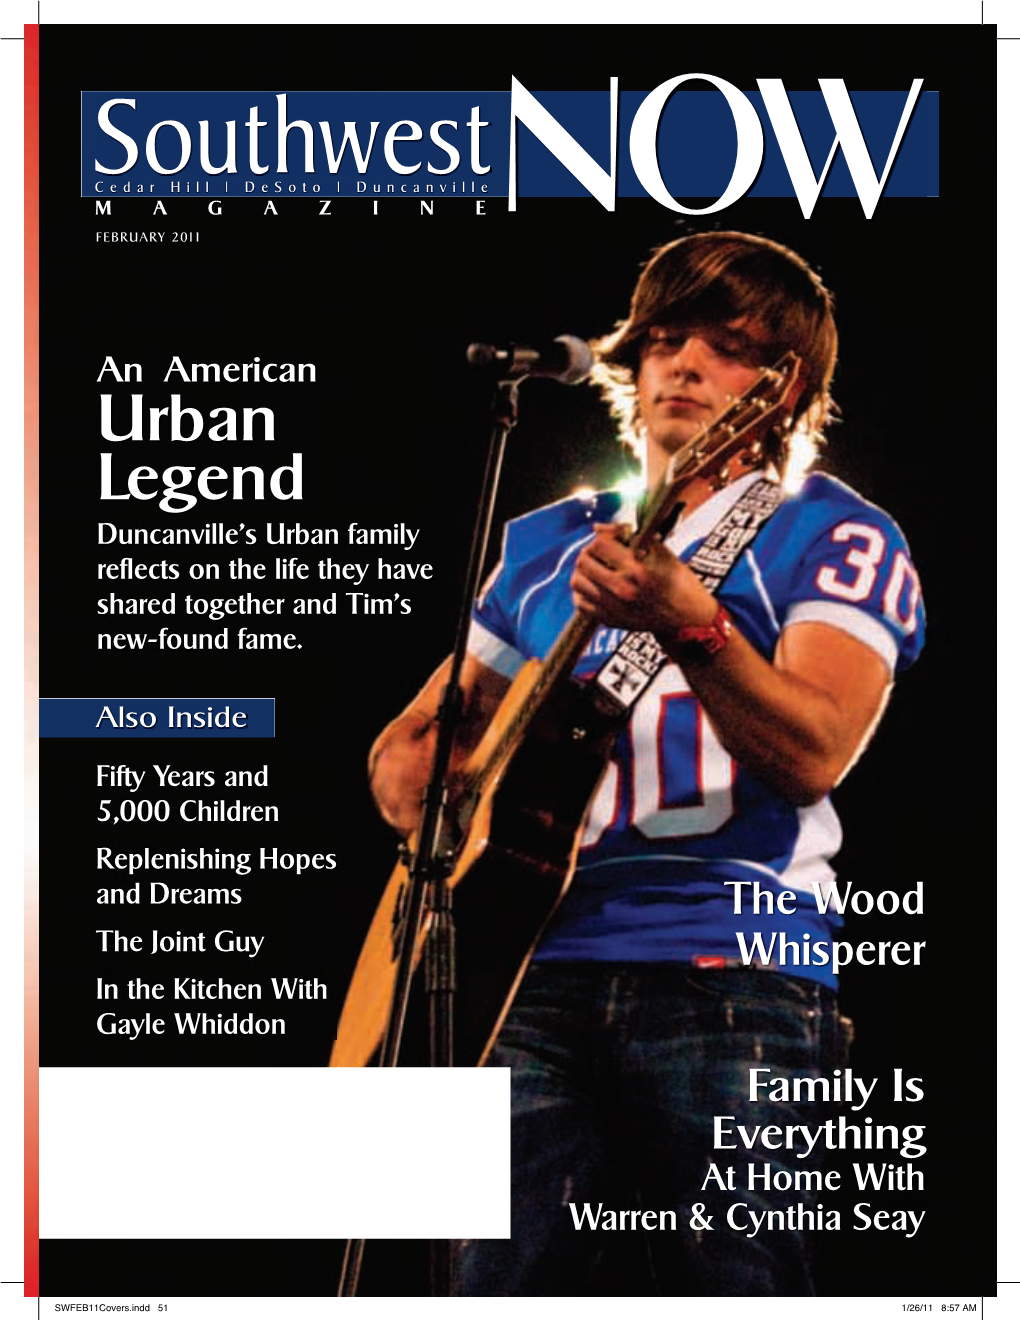 Urban Legend Duncanville’S Urban Family Reflects on the Life They Have Shared Together and Tim’S New-Found Fame